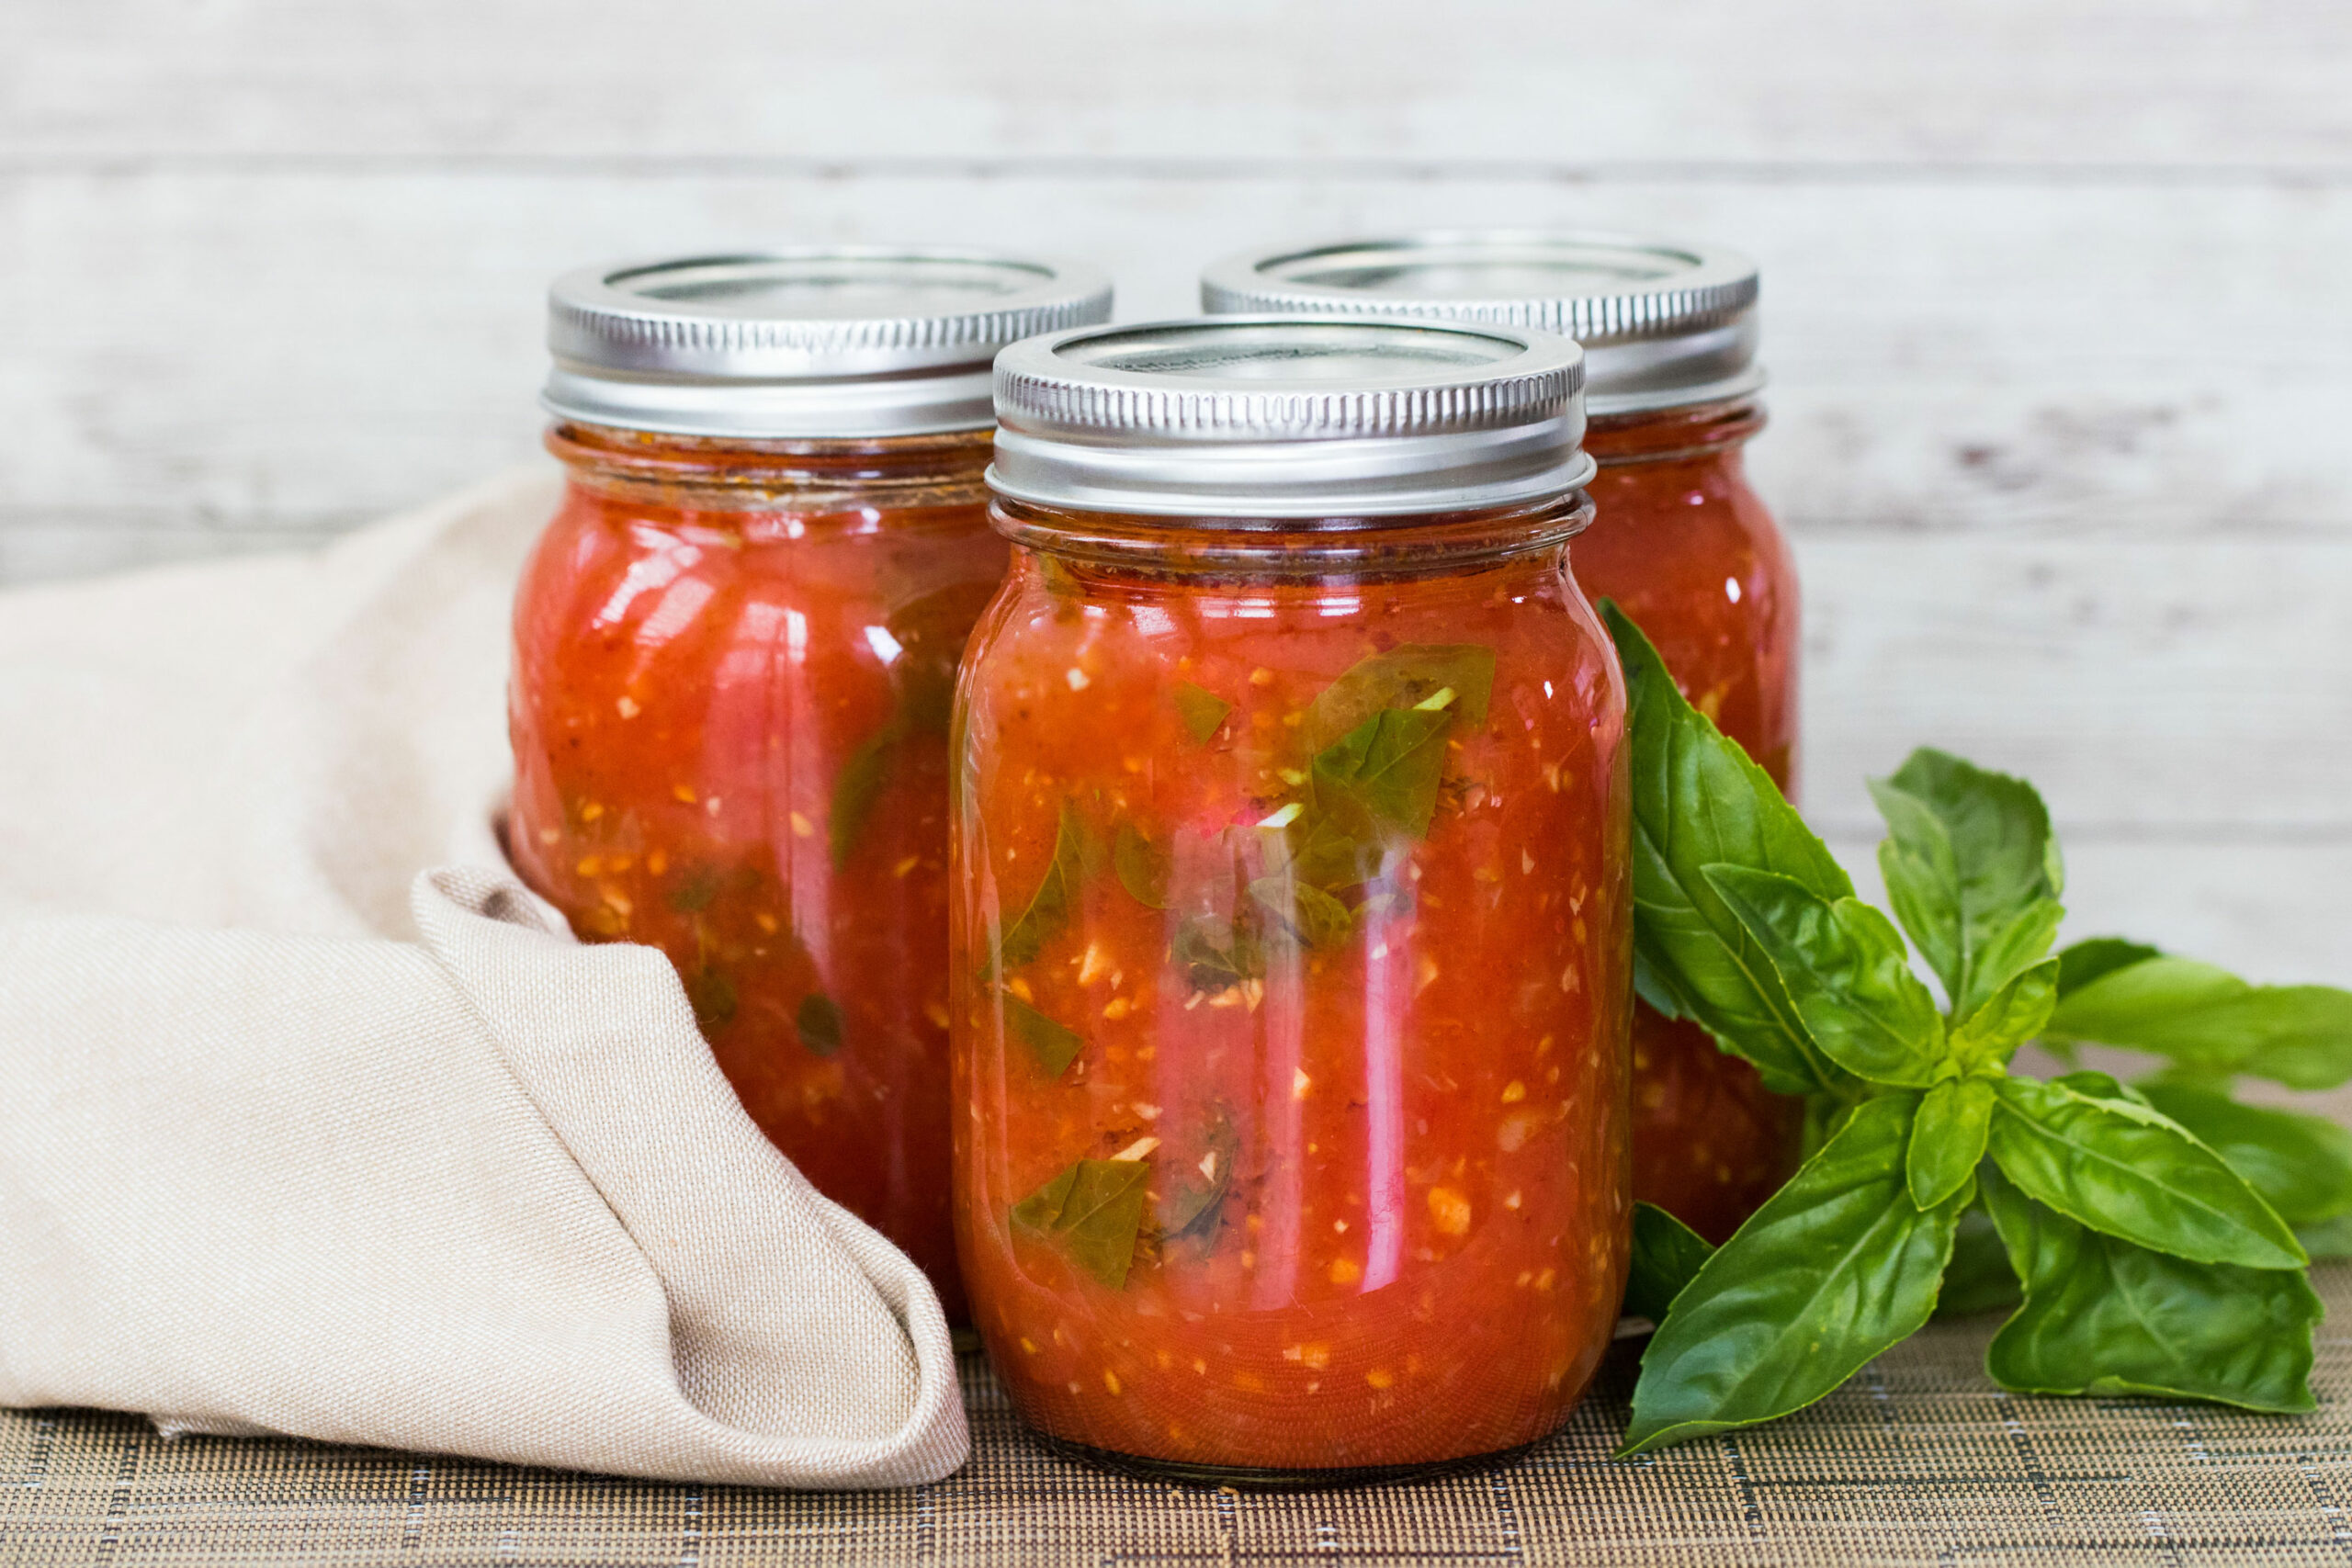 Pomodoro Sauce from Farmers Market Ingredients